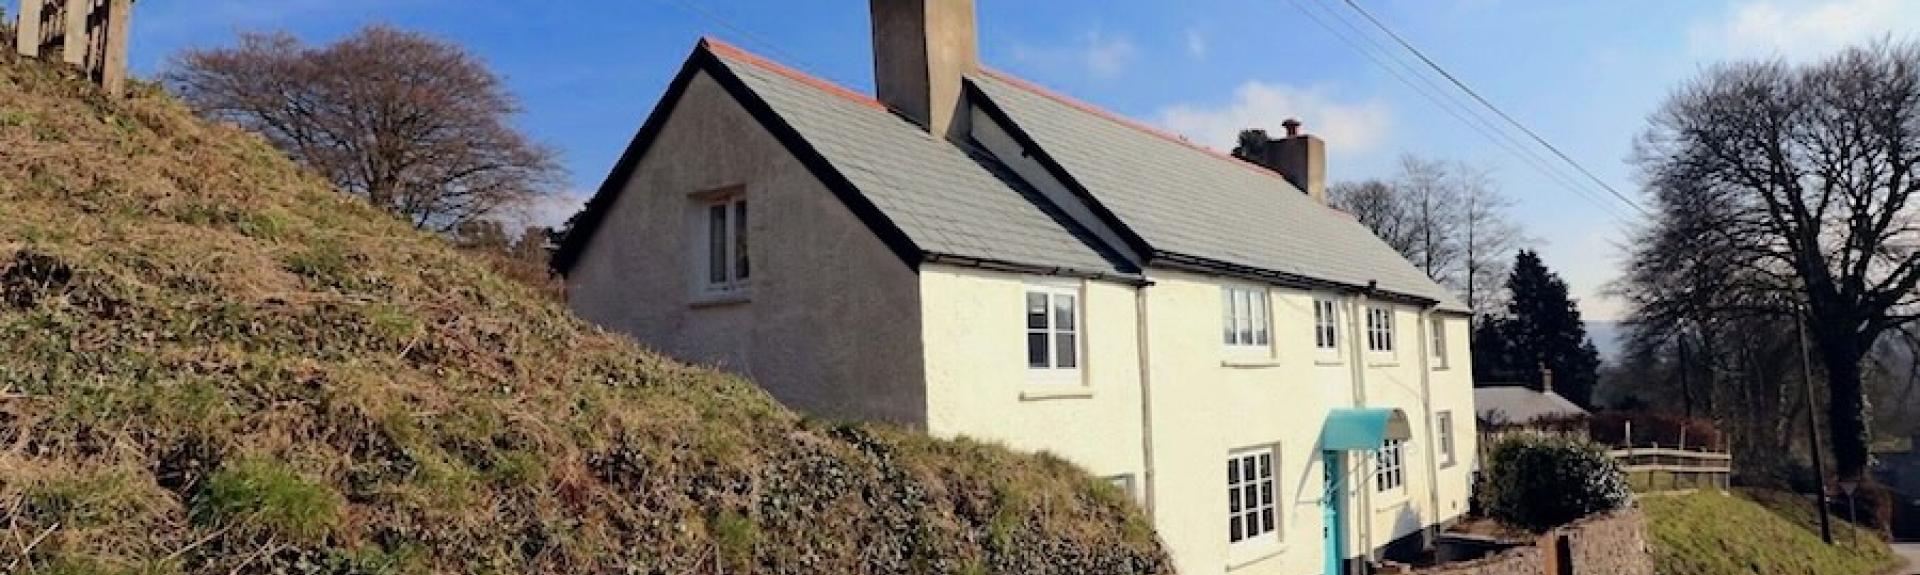 An Exmoor Longhouse overlooks a quiet, steep-banked country lane.